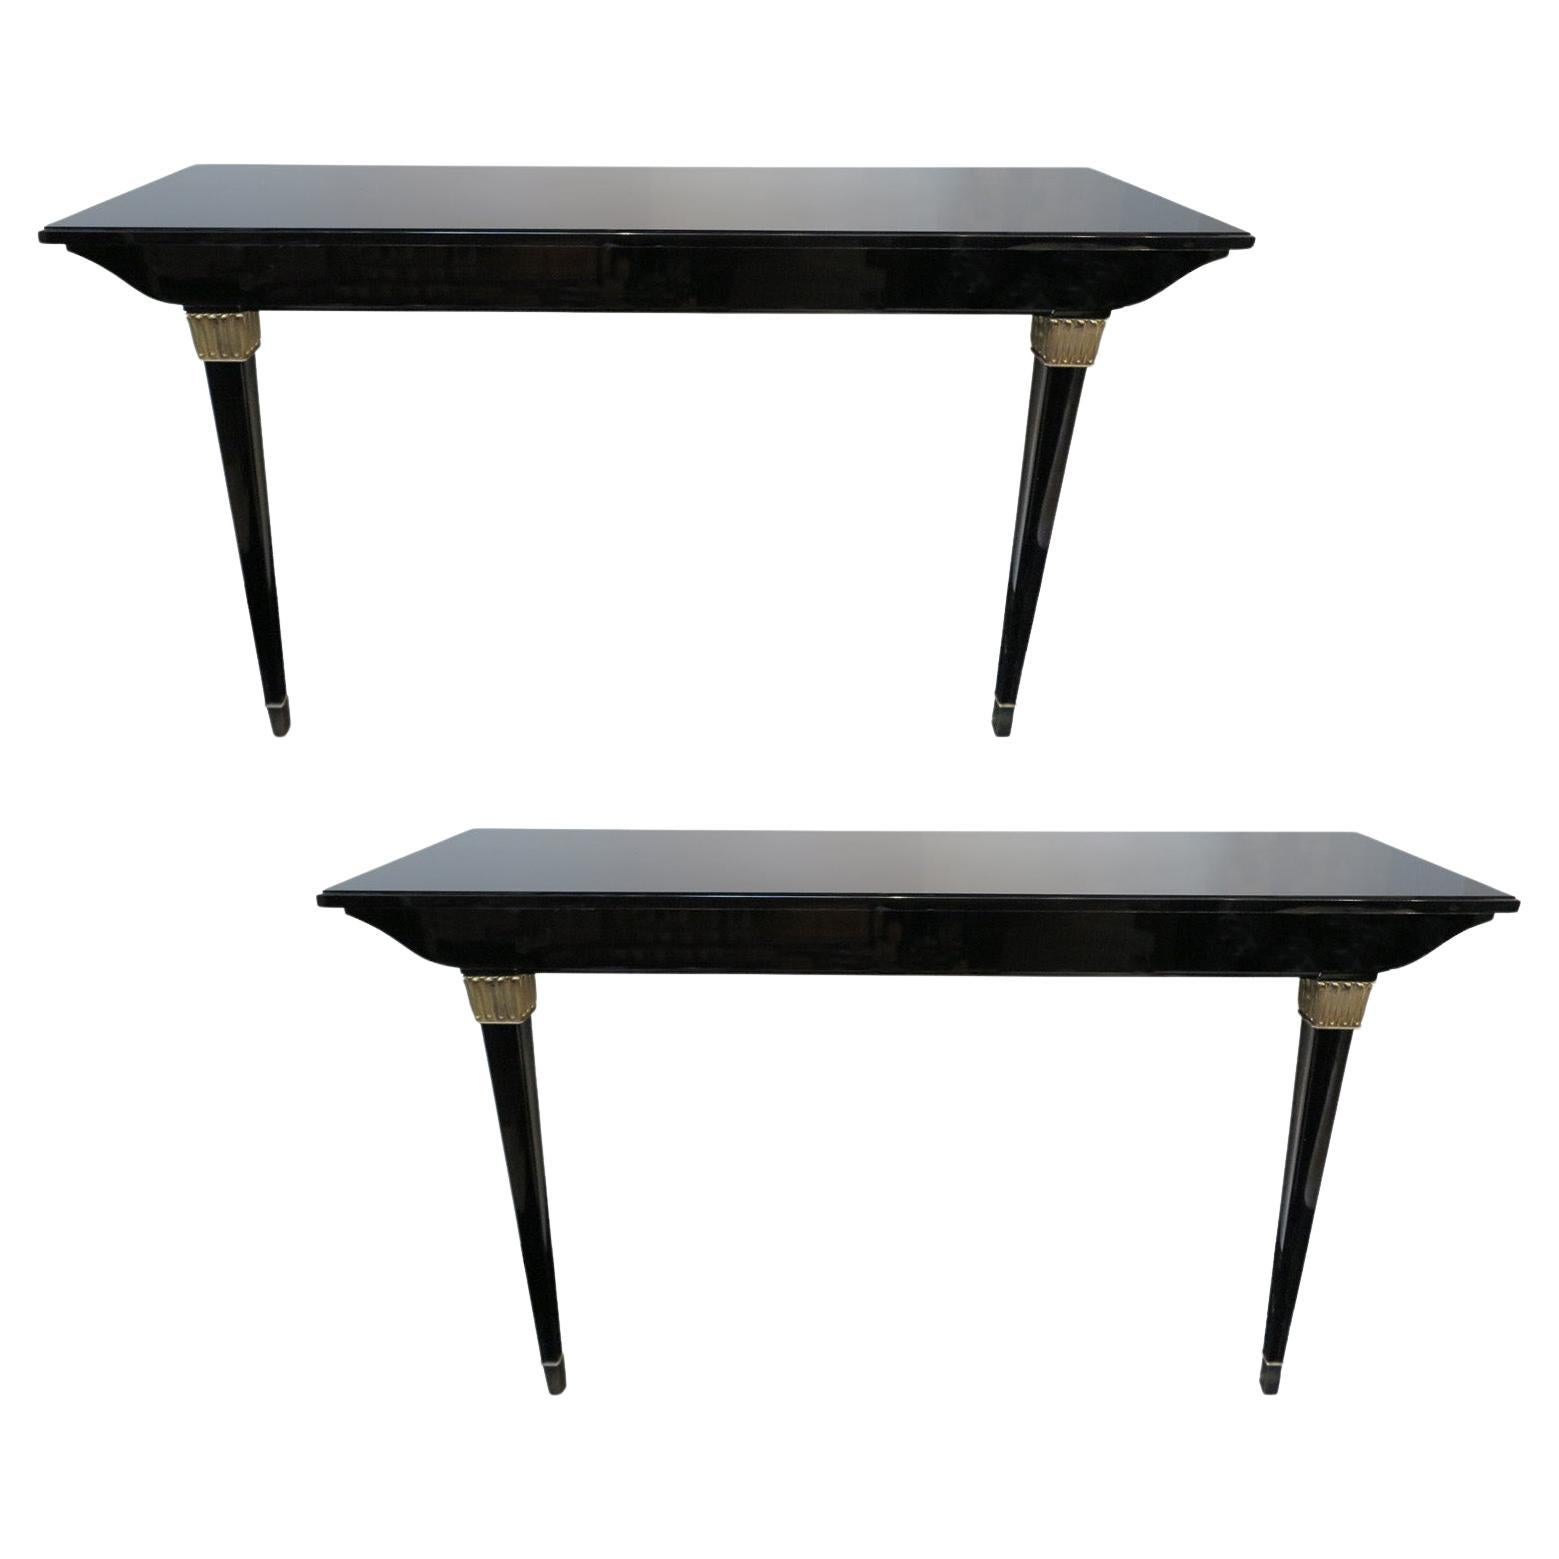 Pair of Art Deco Black Lacquer Wall Mounted Consoles with Brass Accents